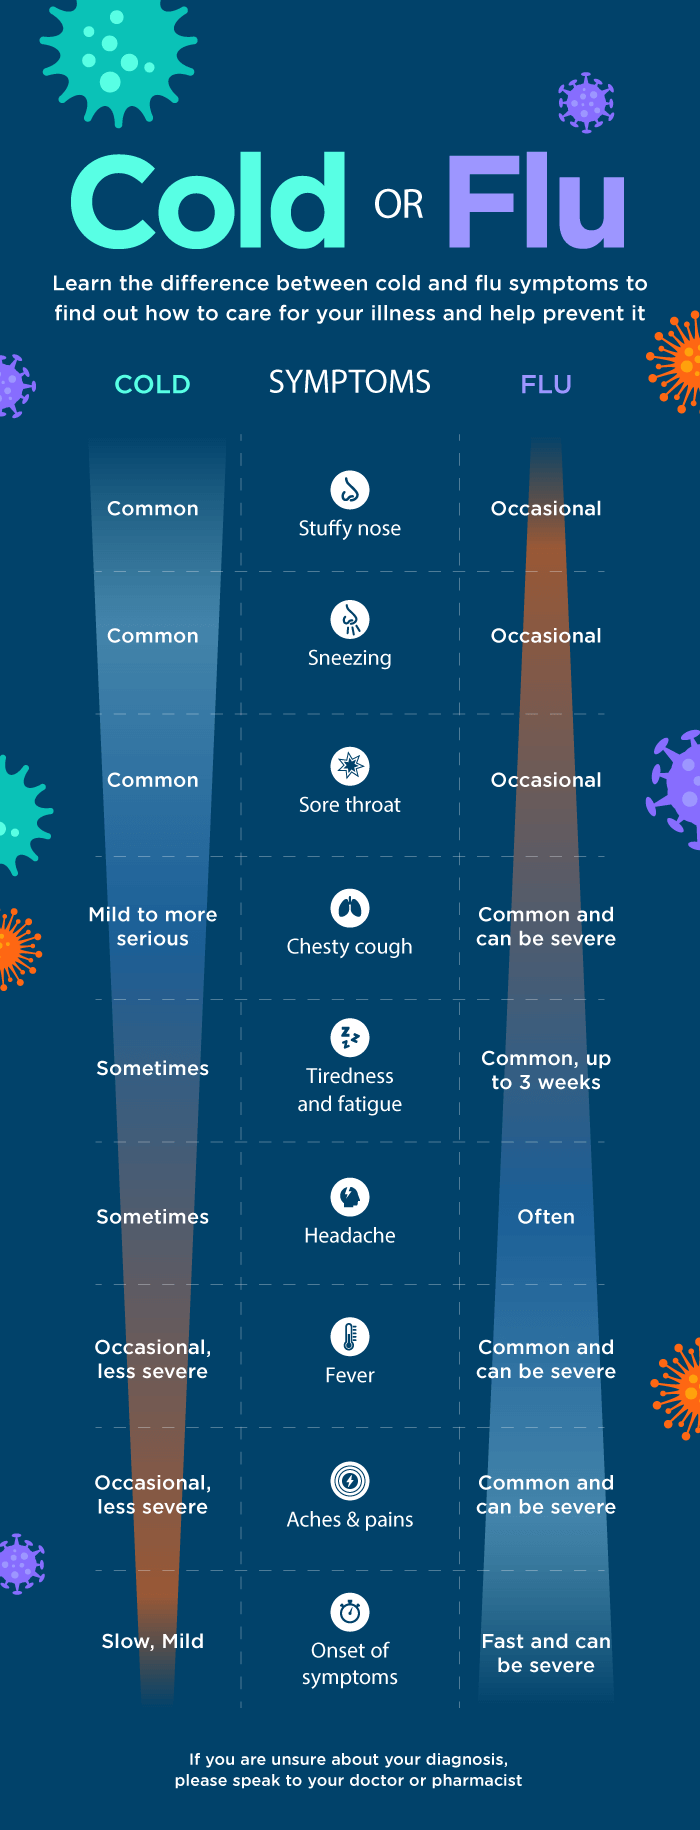 Image showing the differences between cold symptoms and flu symptoms